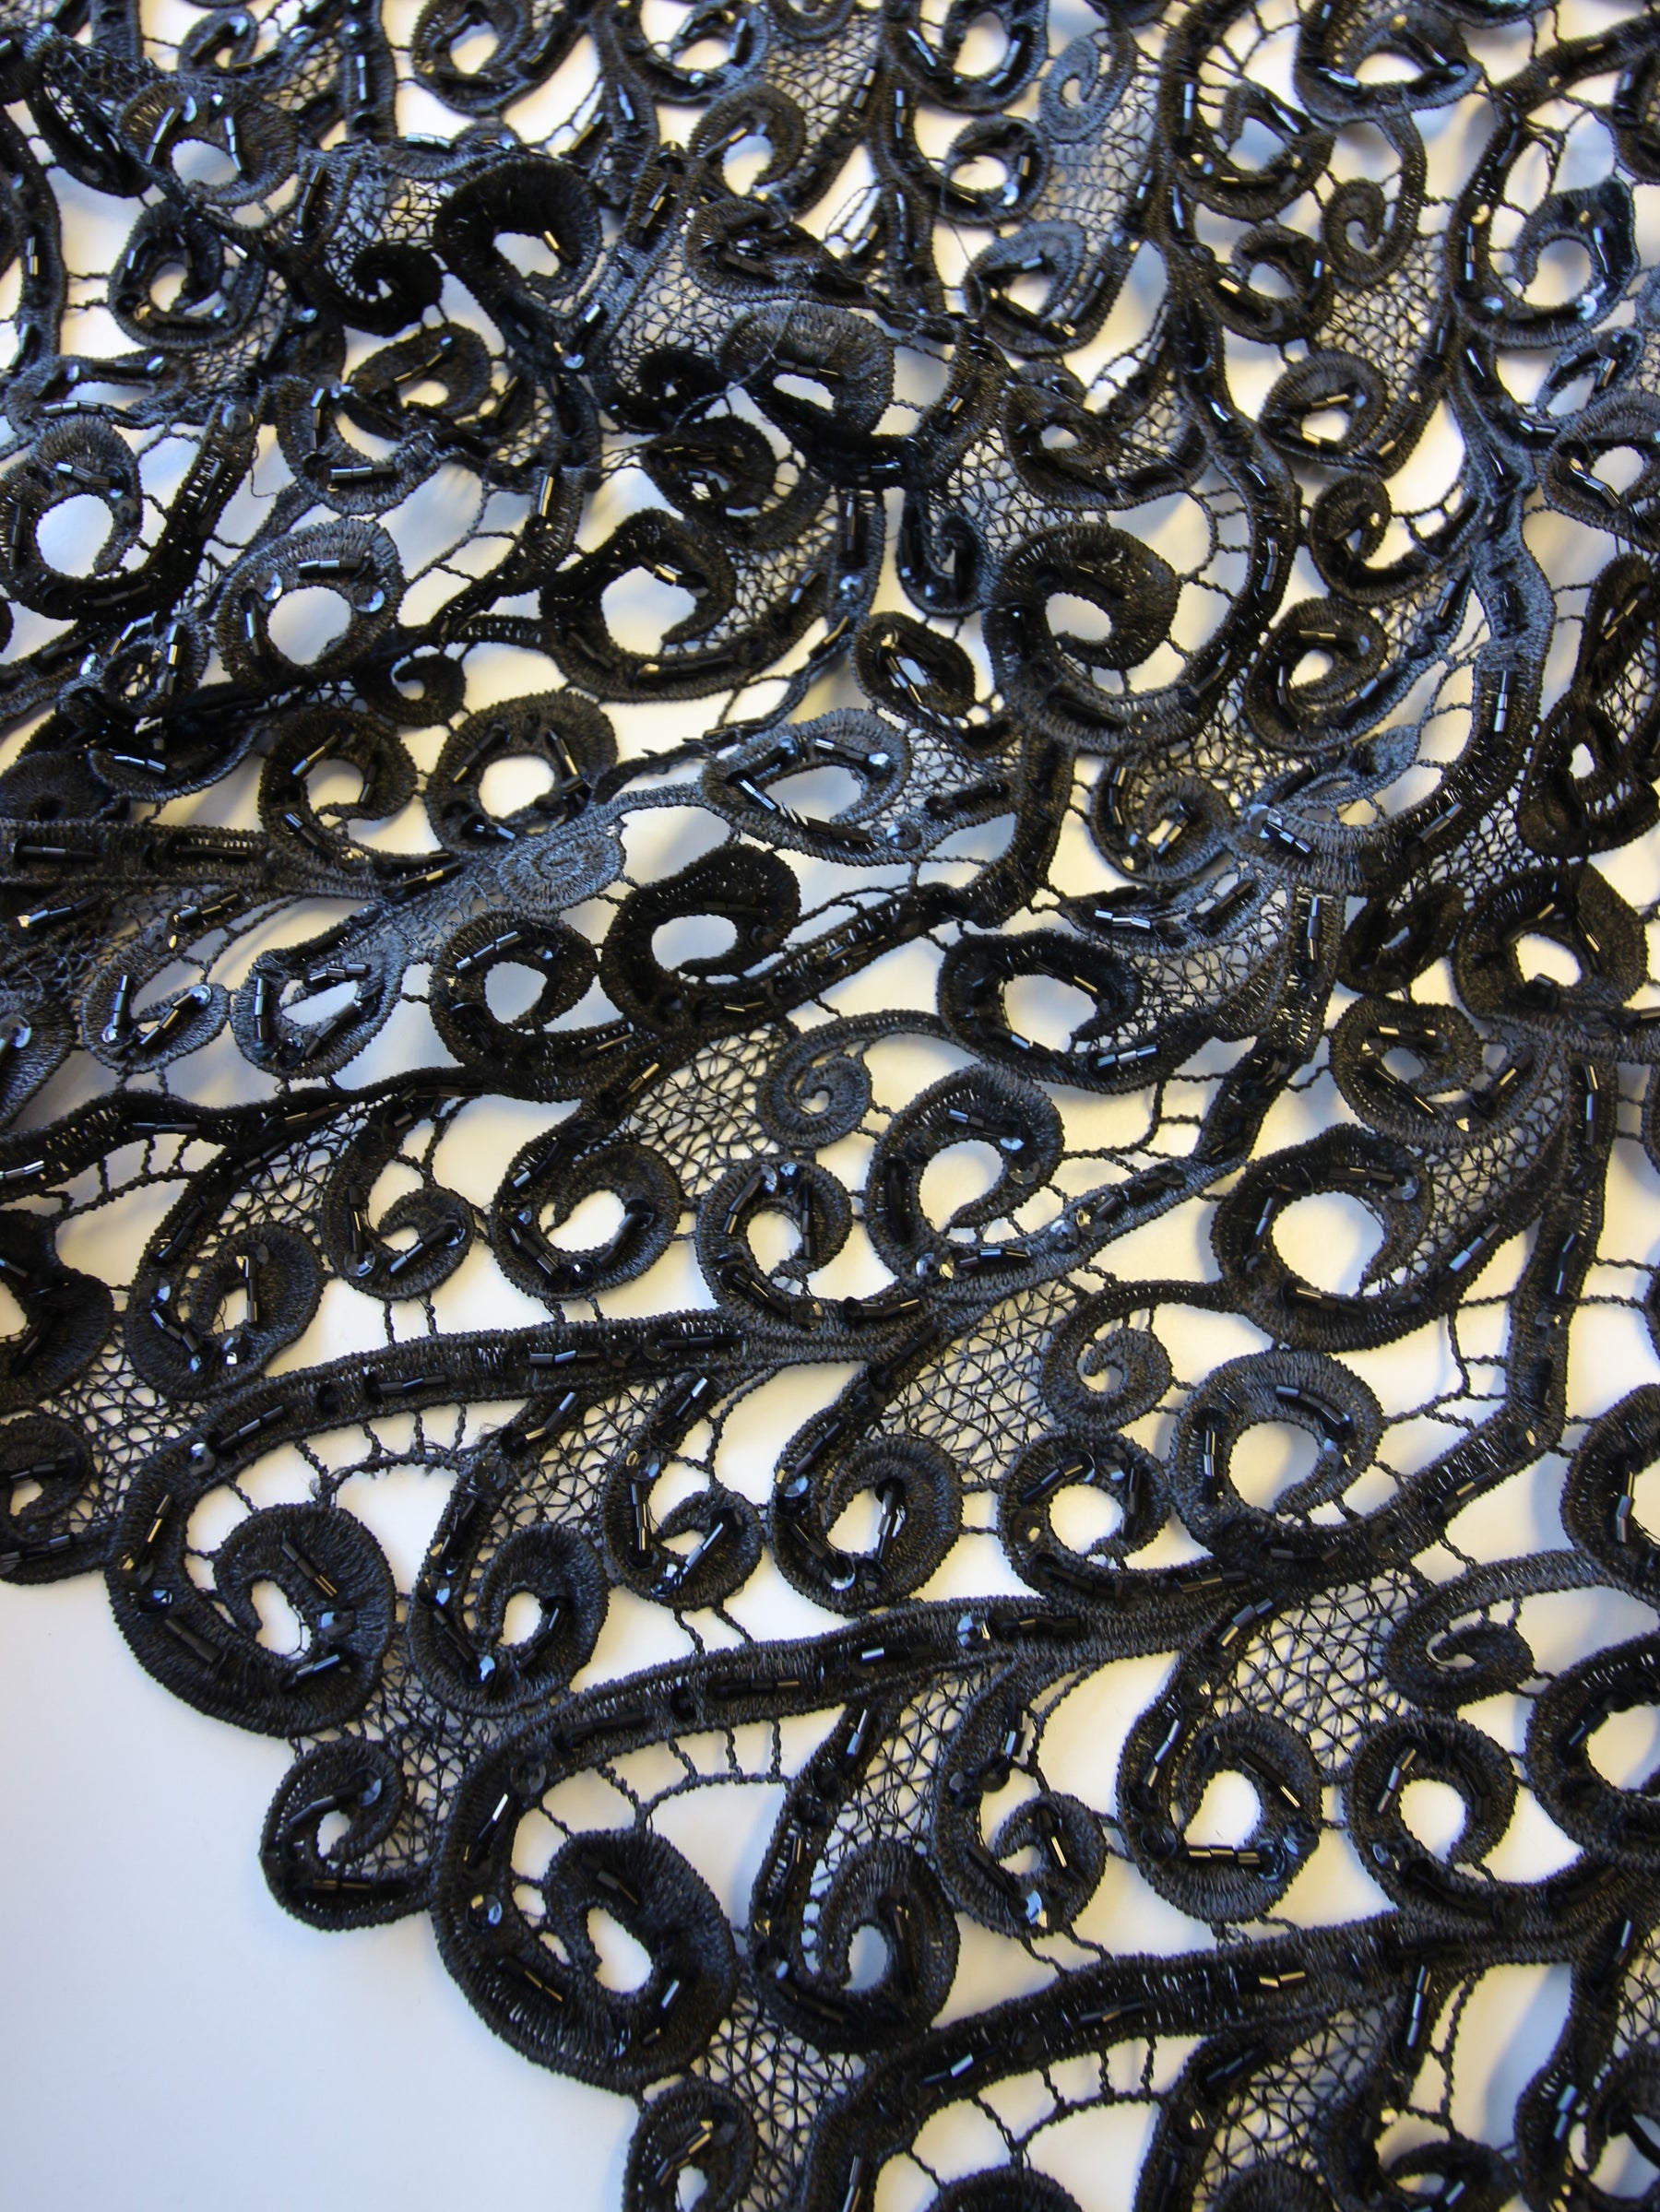 Guipure Lace Fabric - Black - Floral Bridal Lace Guipure By Yard